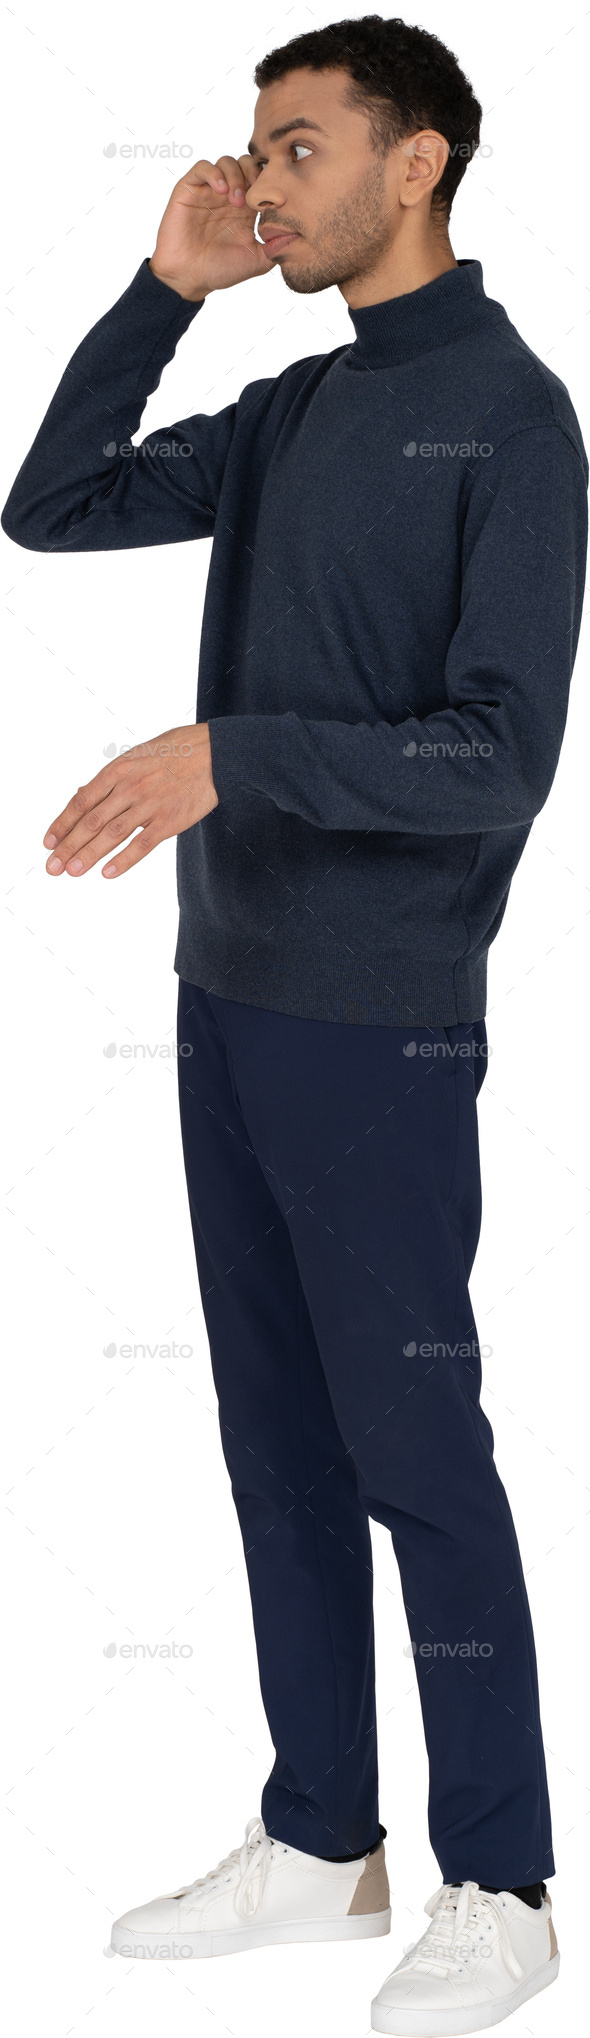 a man in a navy sweatshirt and black pants with his hand on his face